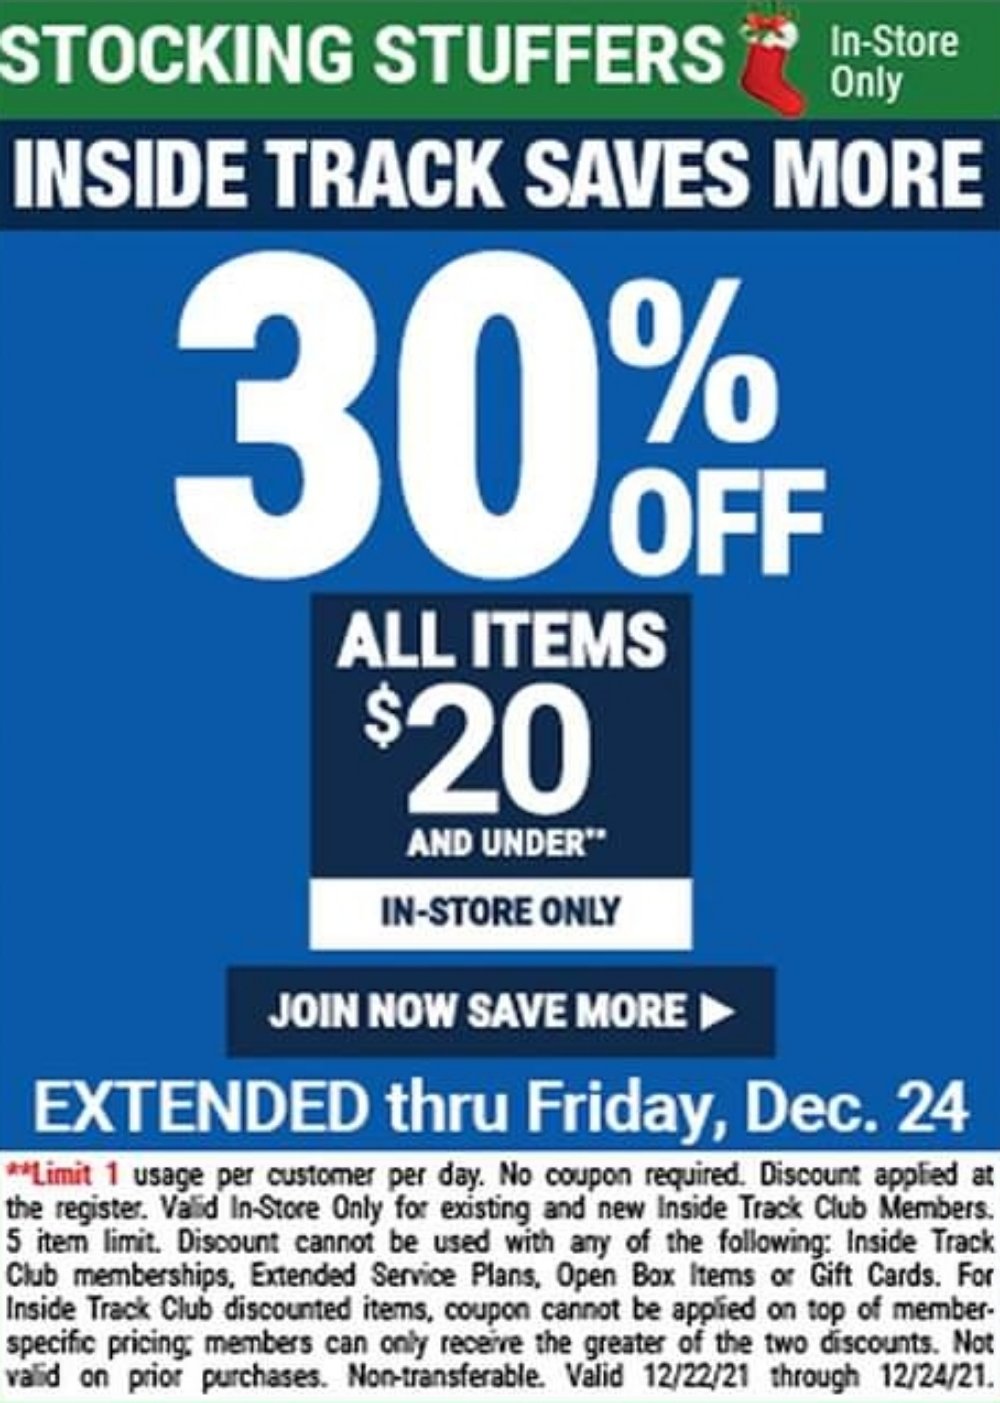 Harbor Freight Coupon, HF Coupons - ITC 30% OFF ITEMS $20 AND BELOW